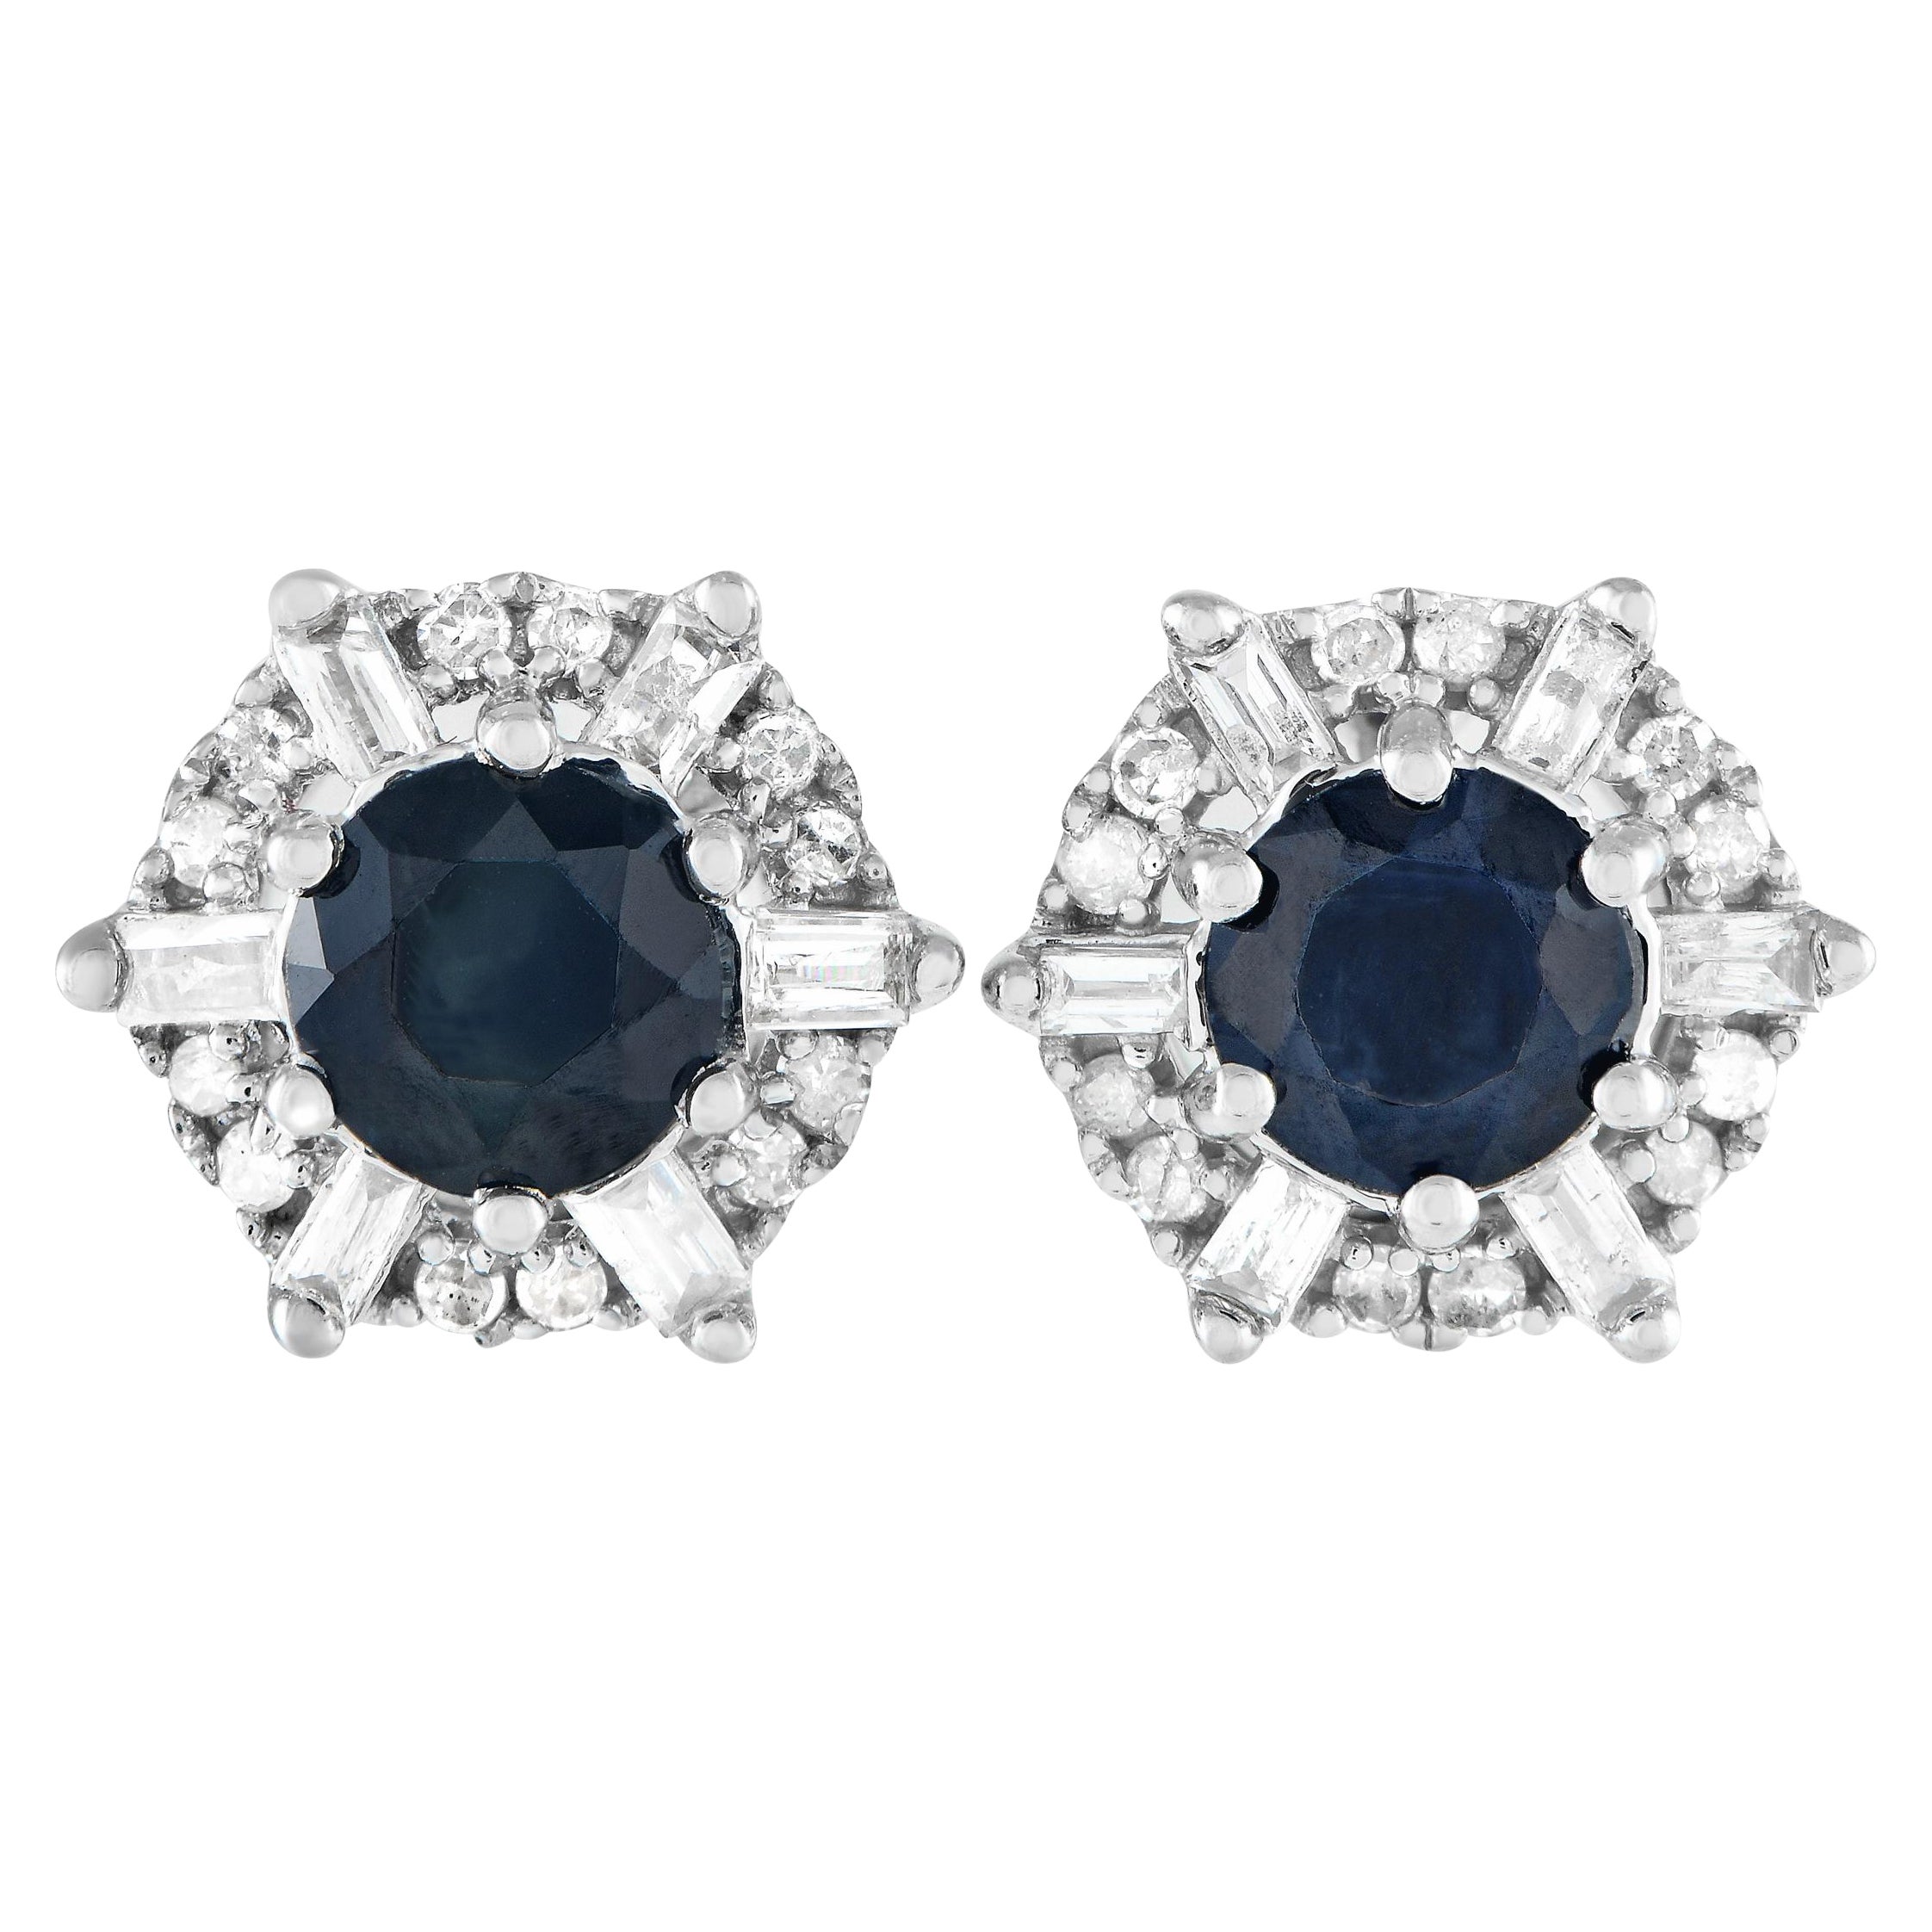 14K White Gold 0.15ct Diamond and Sapphire Stud Earrings ER28419 For Sale